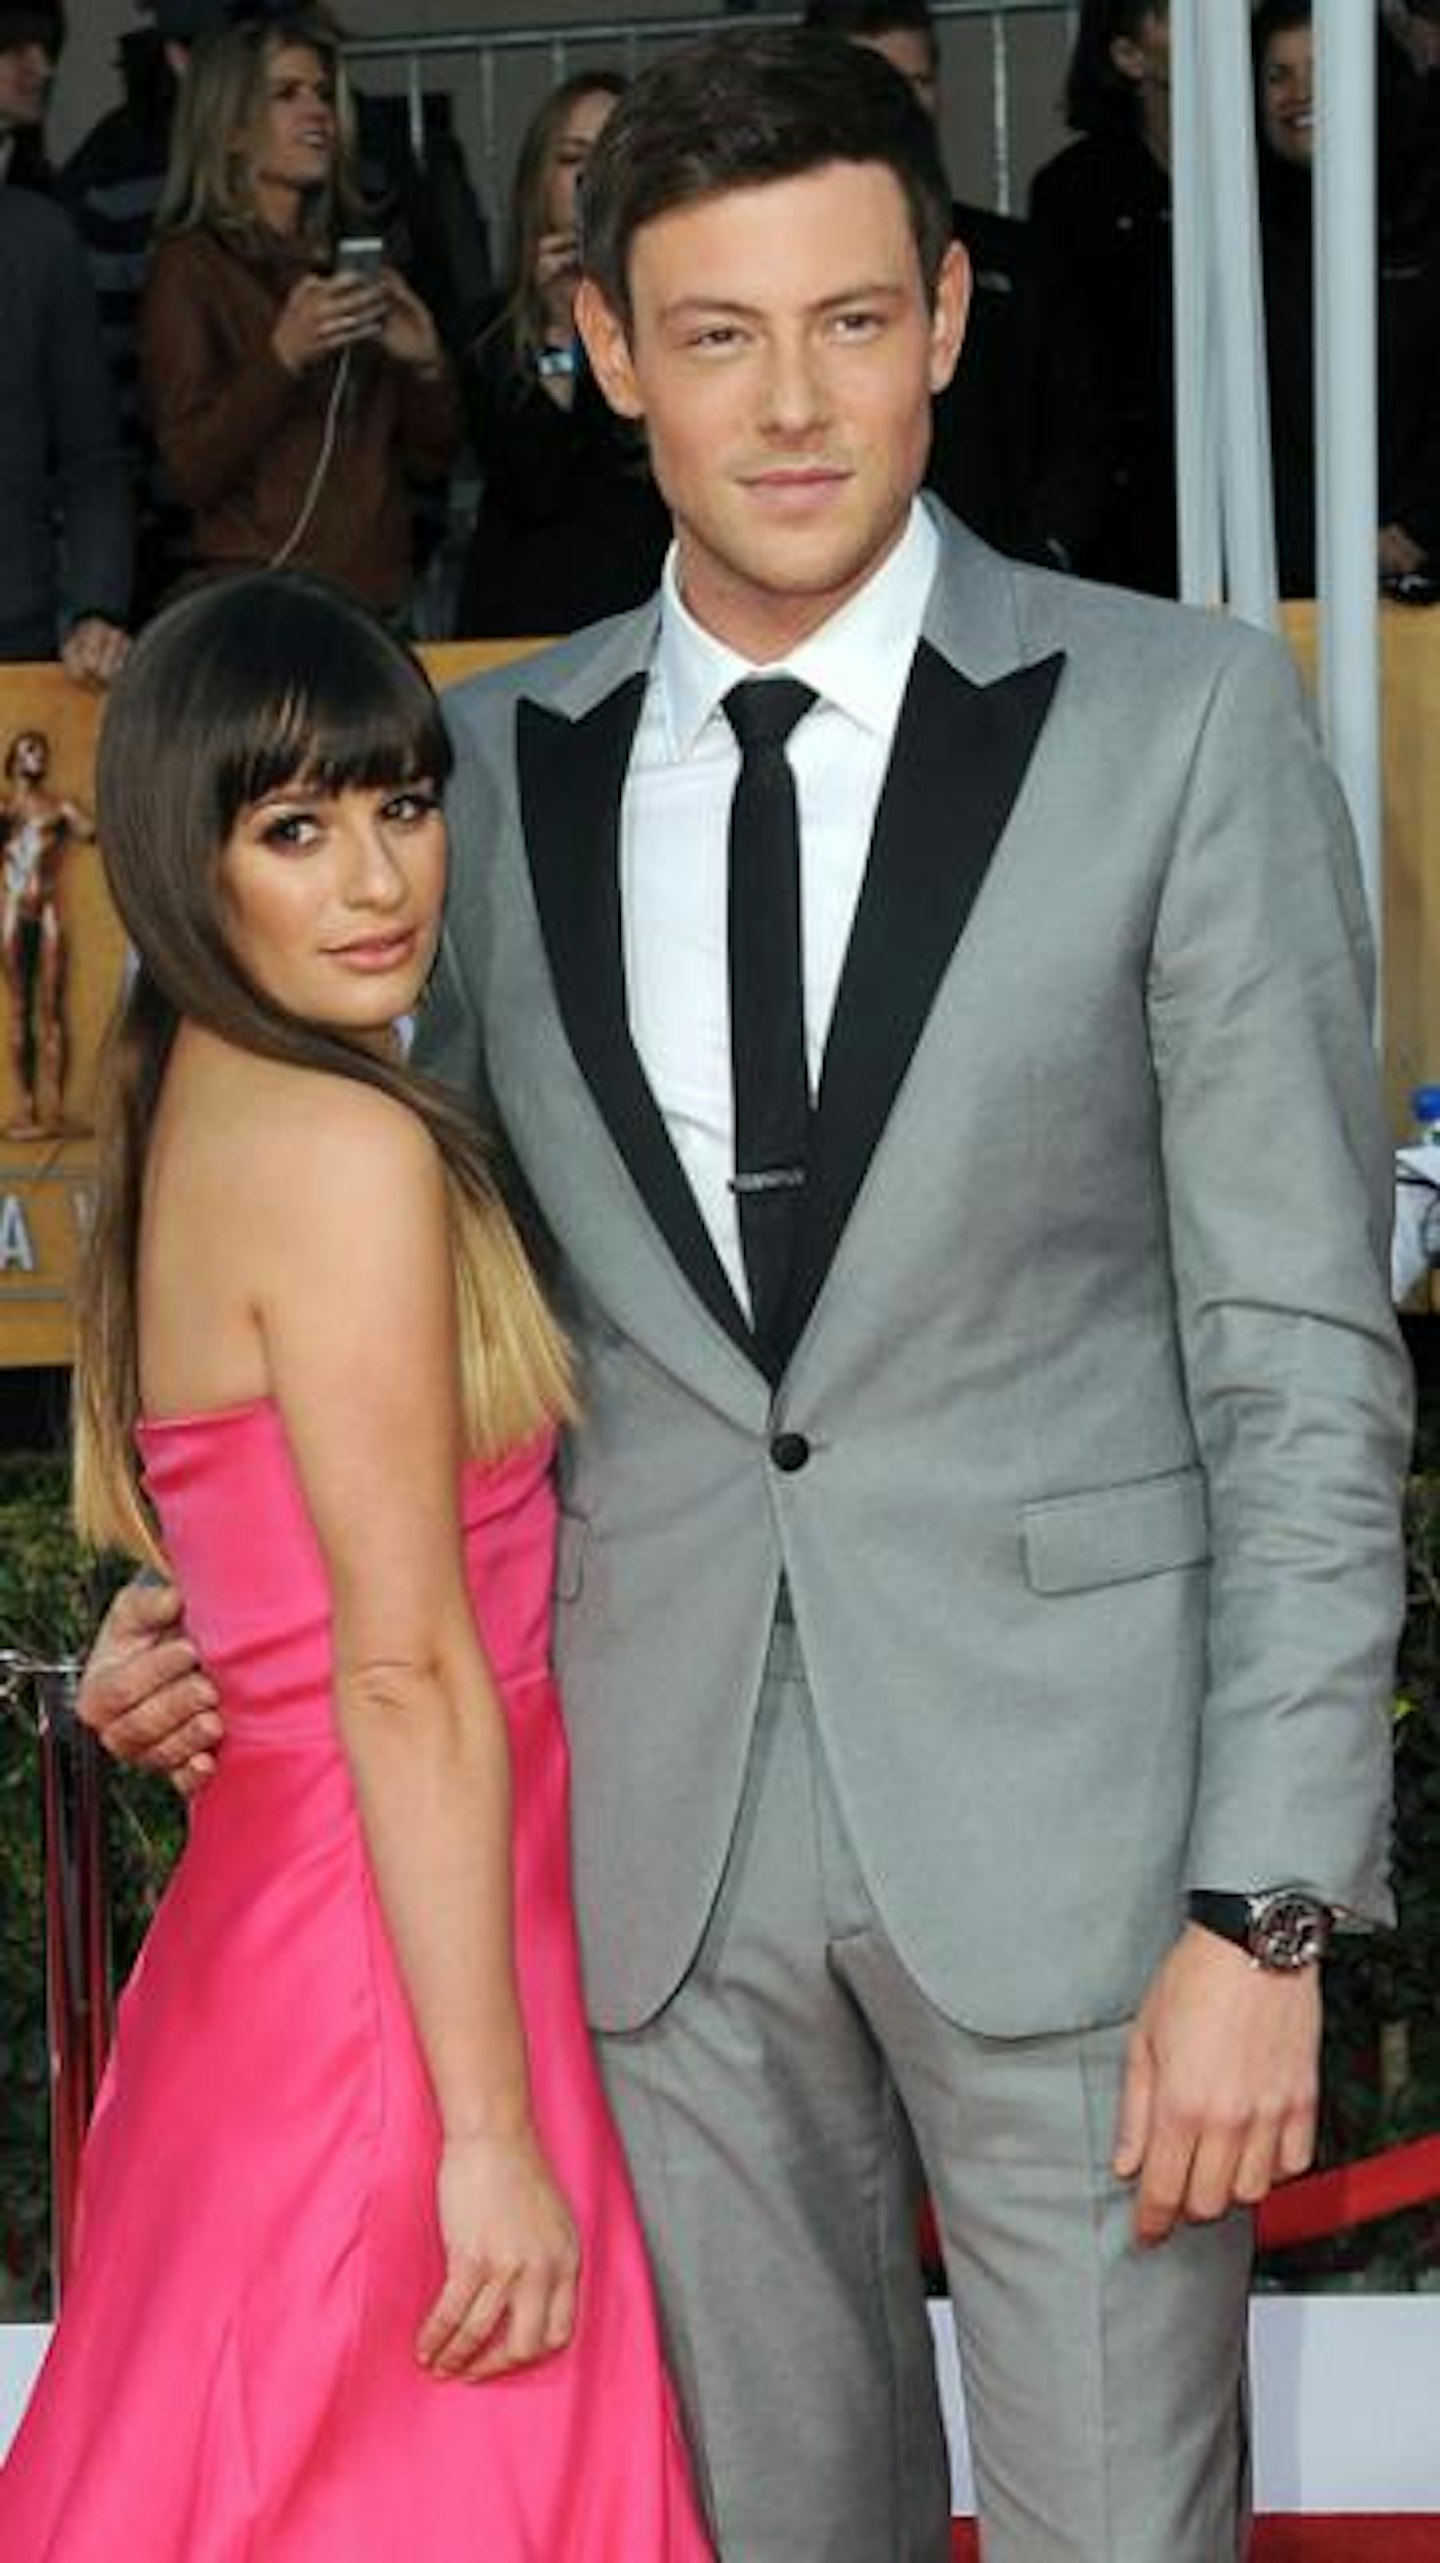 Lea and Corey fell in love on the set of Glee